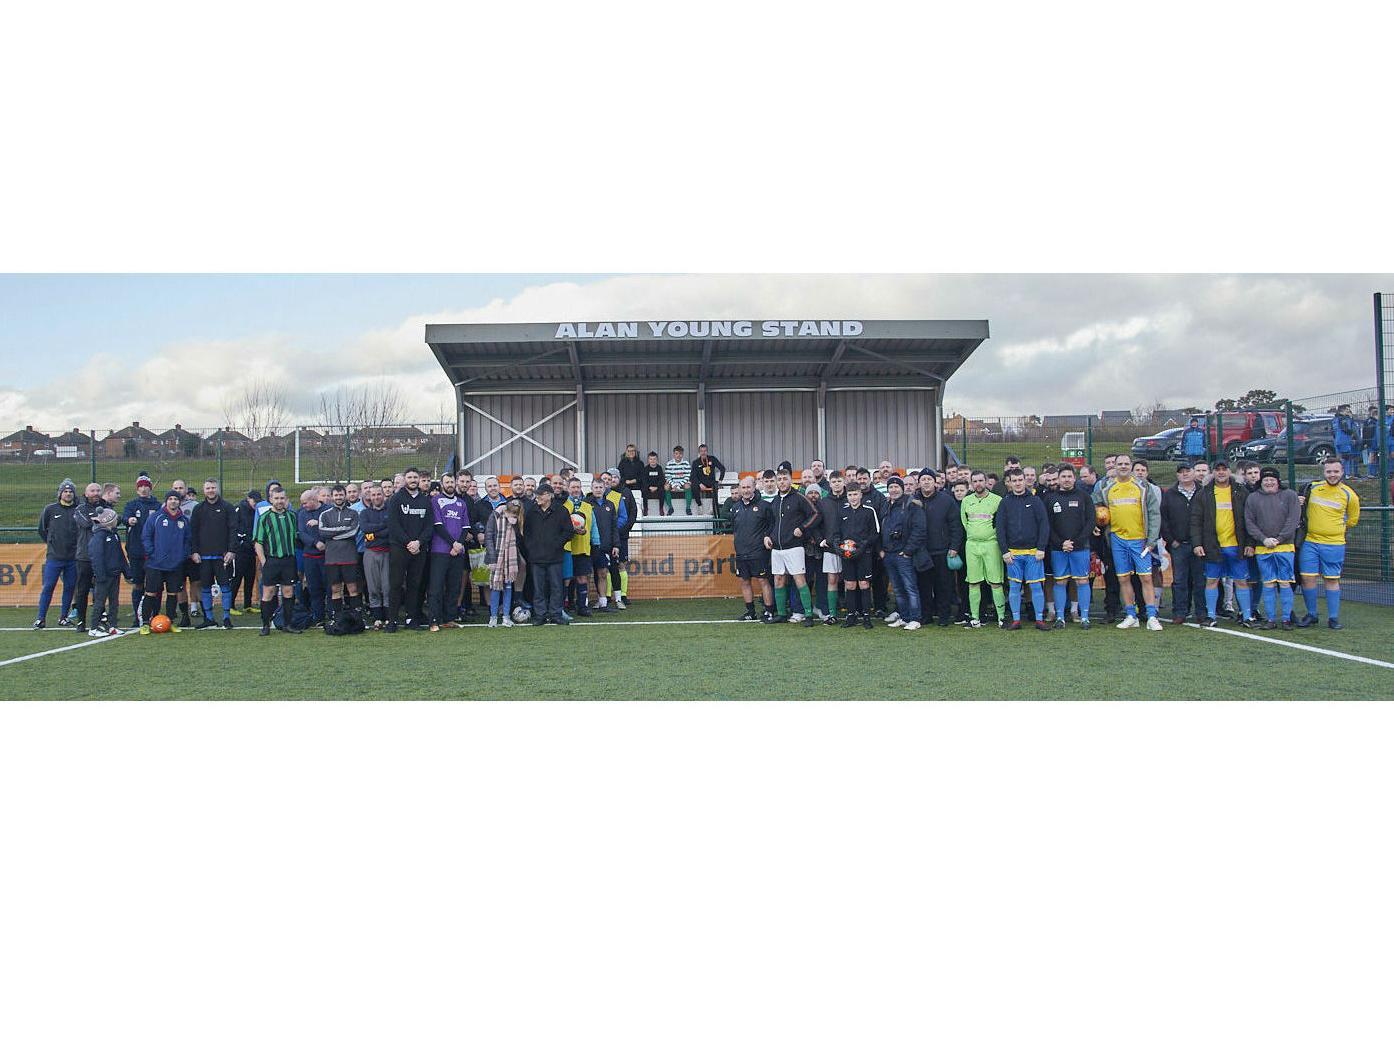 Rugby Borough have named their new stand in memory of Alan Young, a former coach who was involved in many aspects of local football